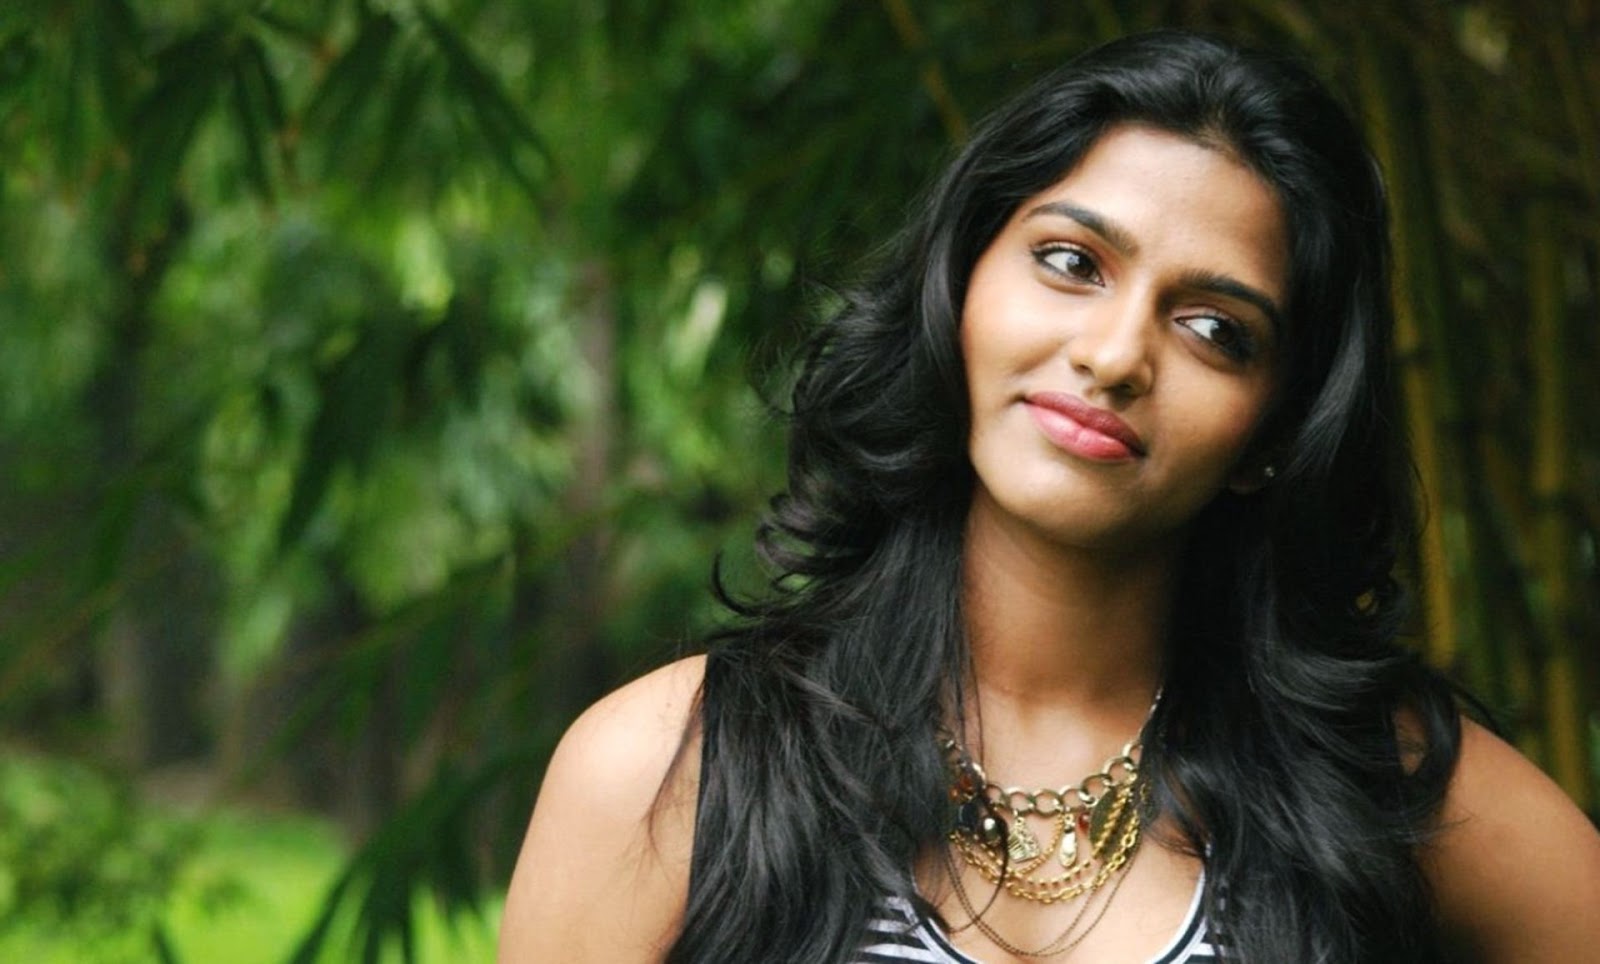 List of Actress Dhansika new upcoming Hollywood movies in 2016, 2017 Calendar on Upcoming Wiki. Updated list of movies 2016-2017. Info about films released in wiki, imdb, wikipedia.